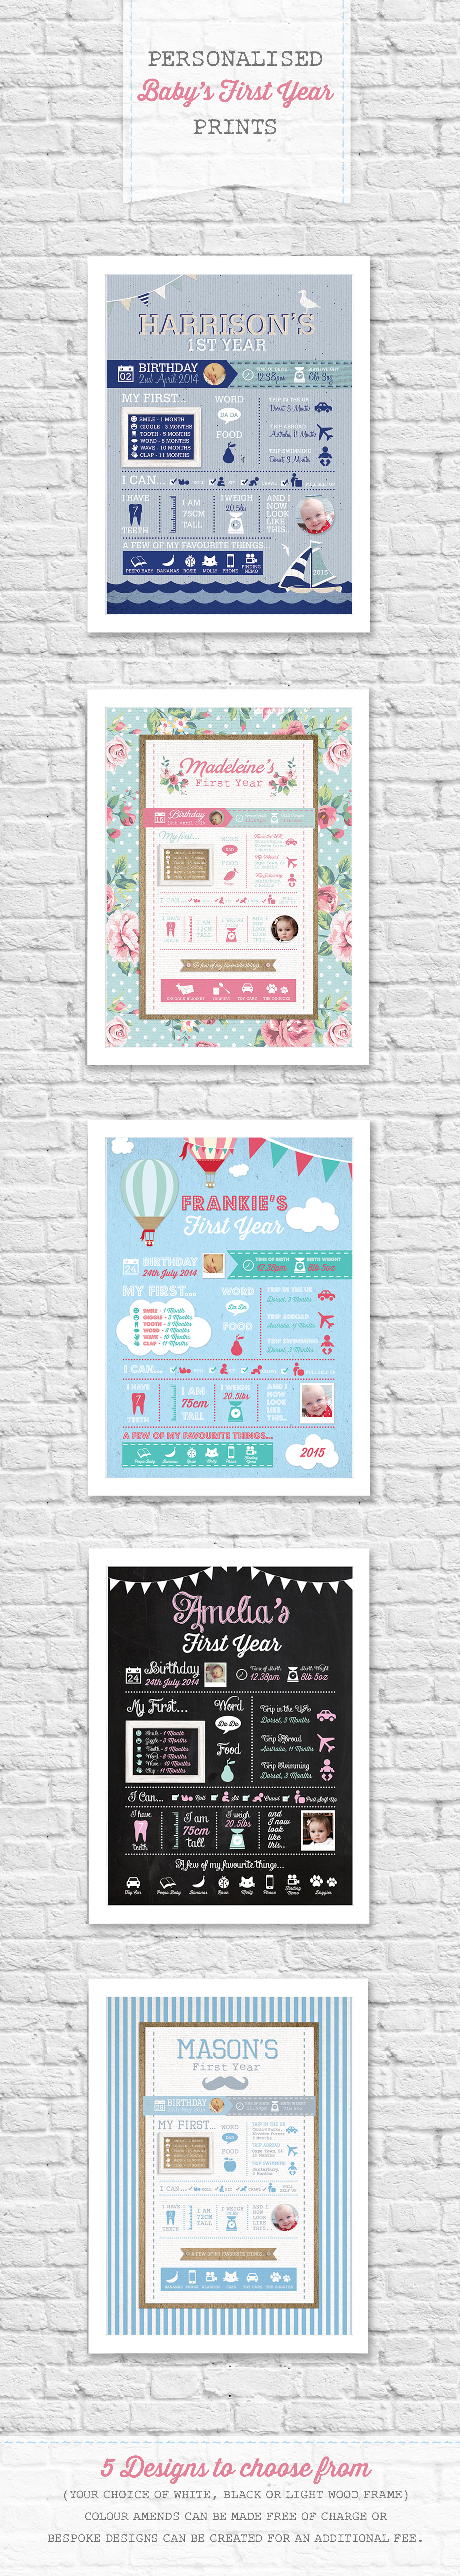 New Baby Line… Personalised Baby’s First Year Prints